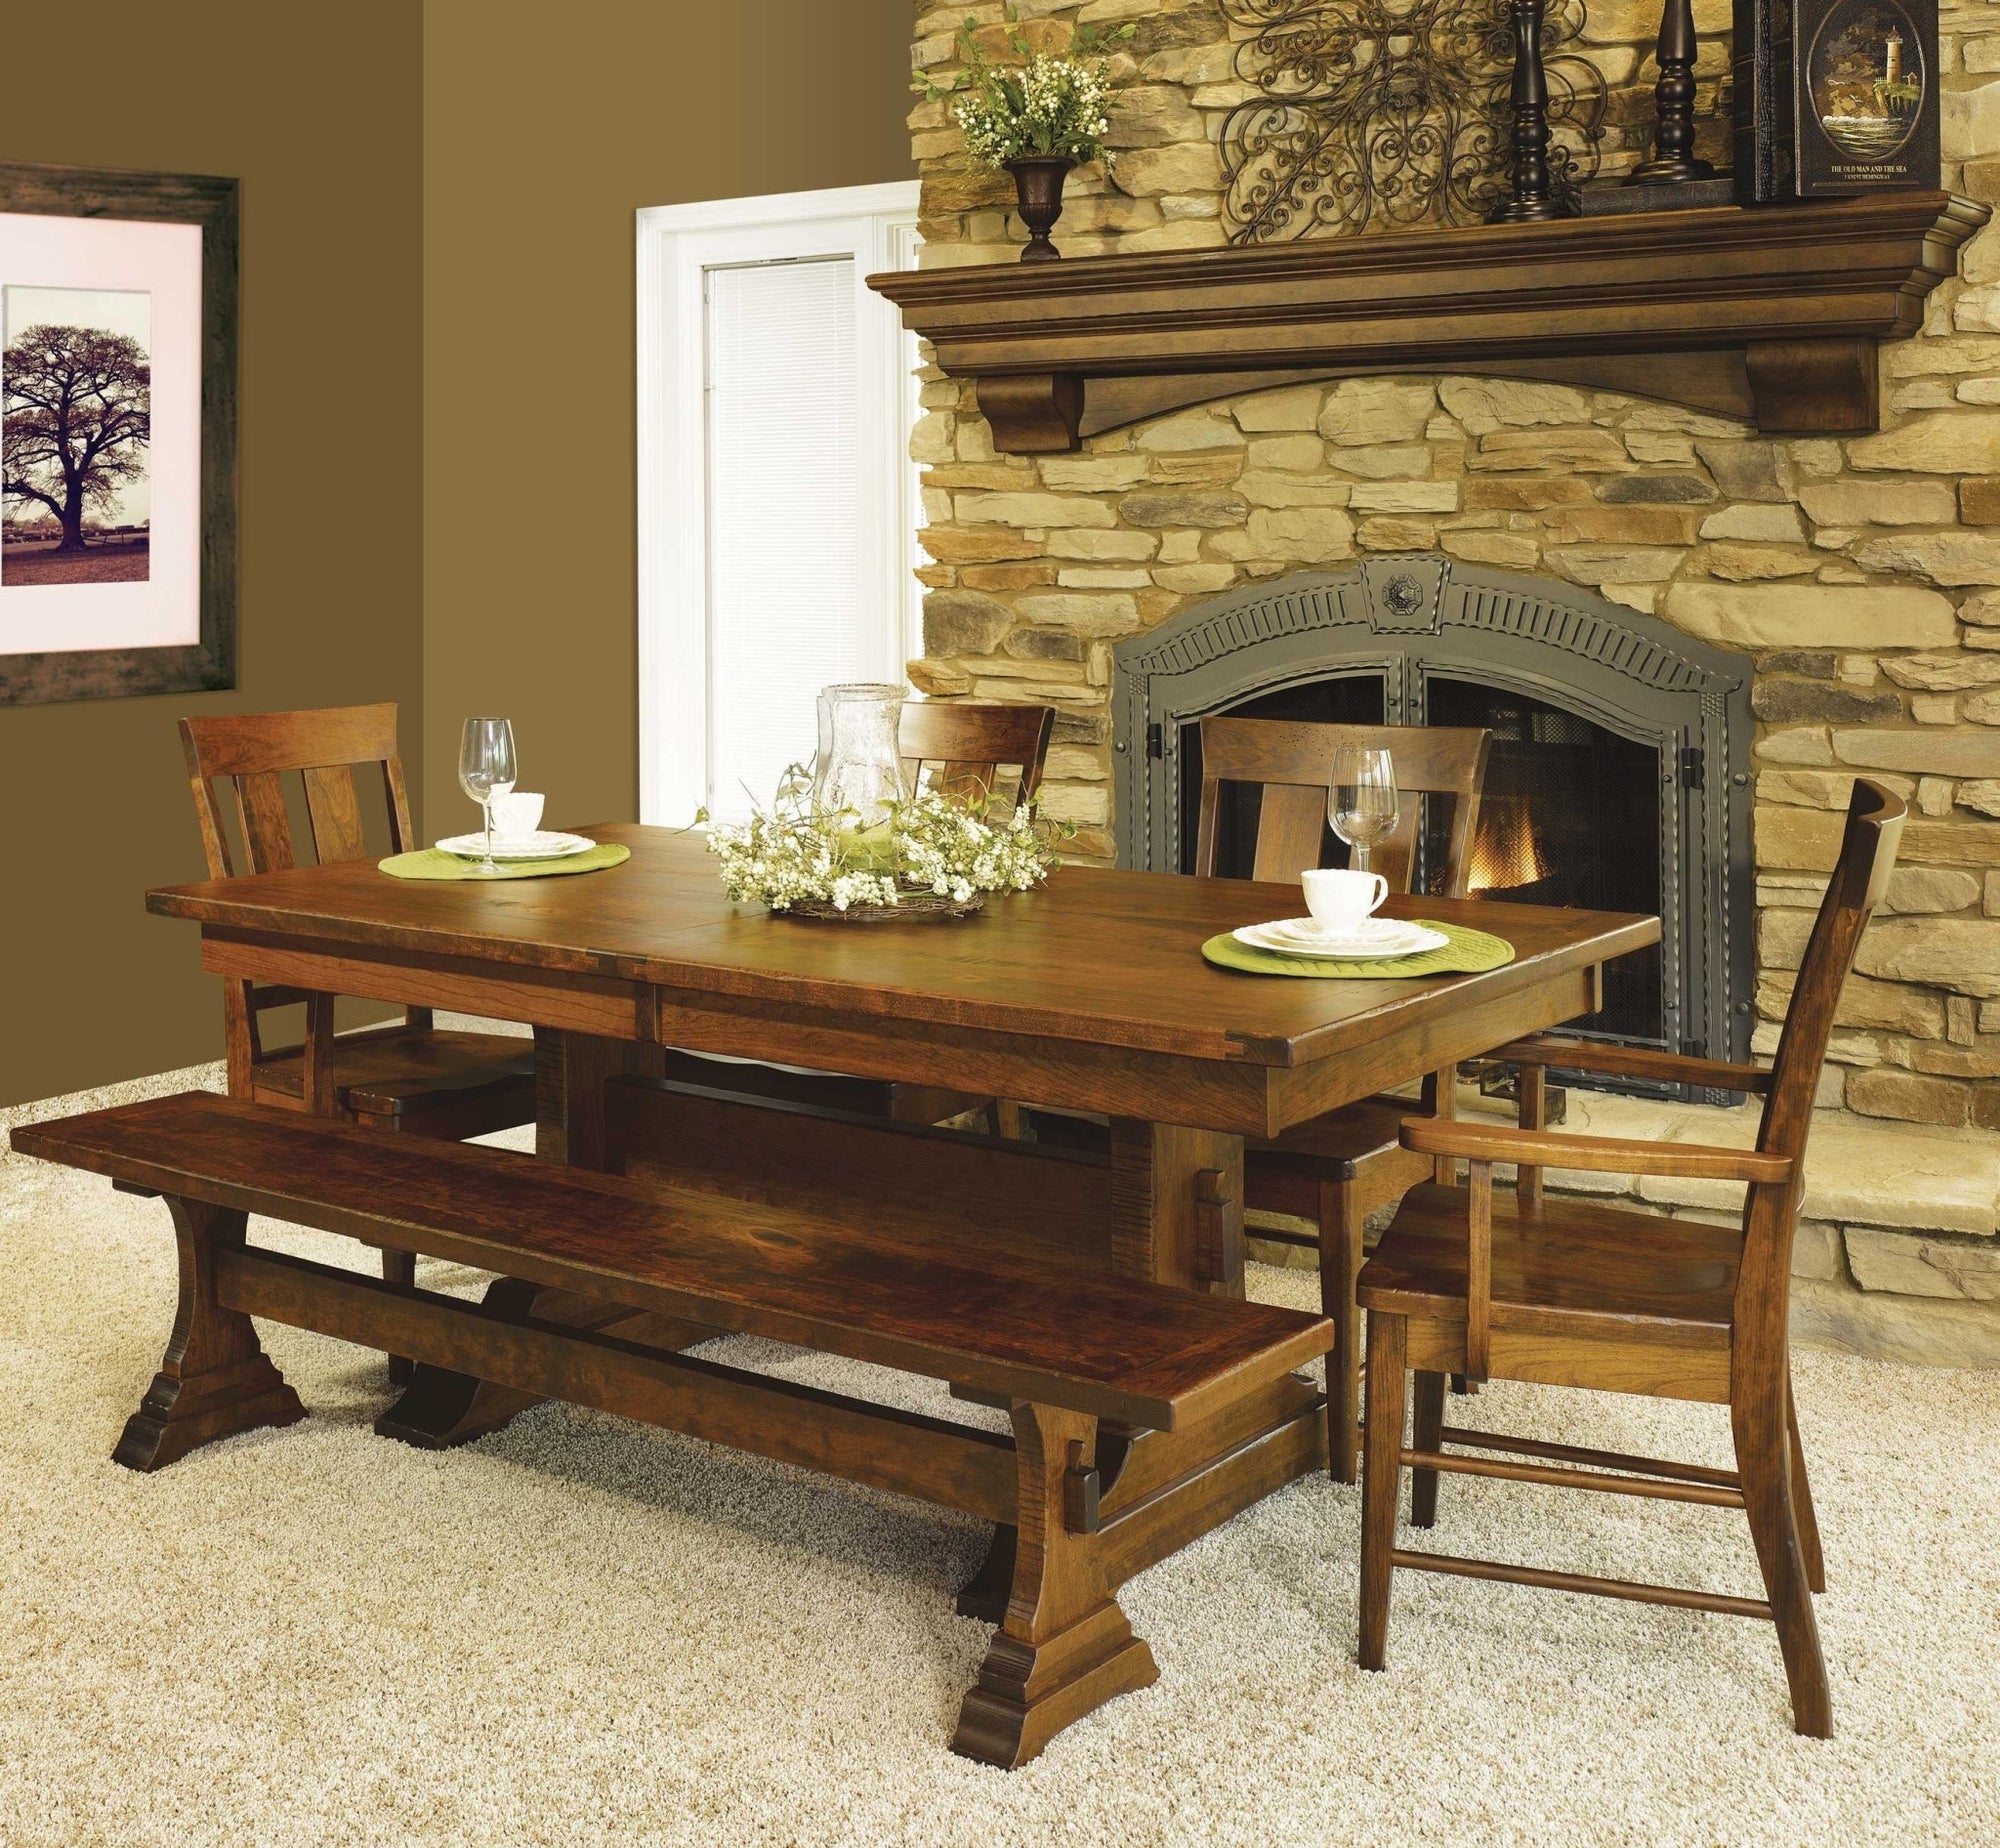 Kennan Trestle Table - snyders.furniture